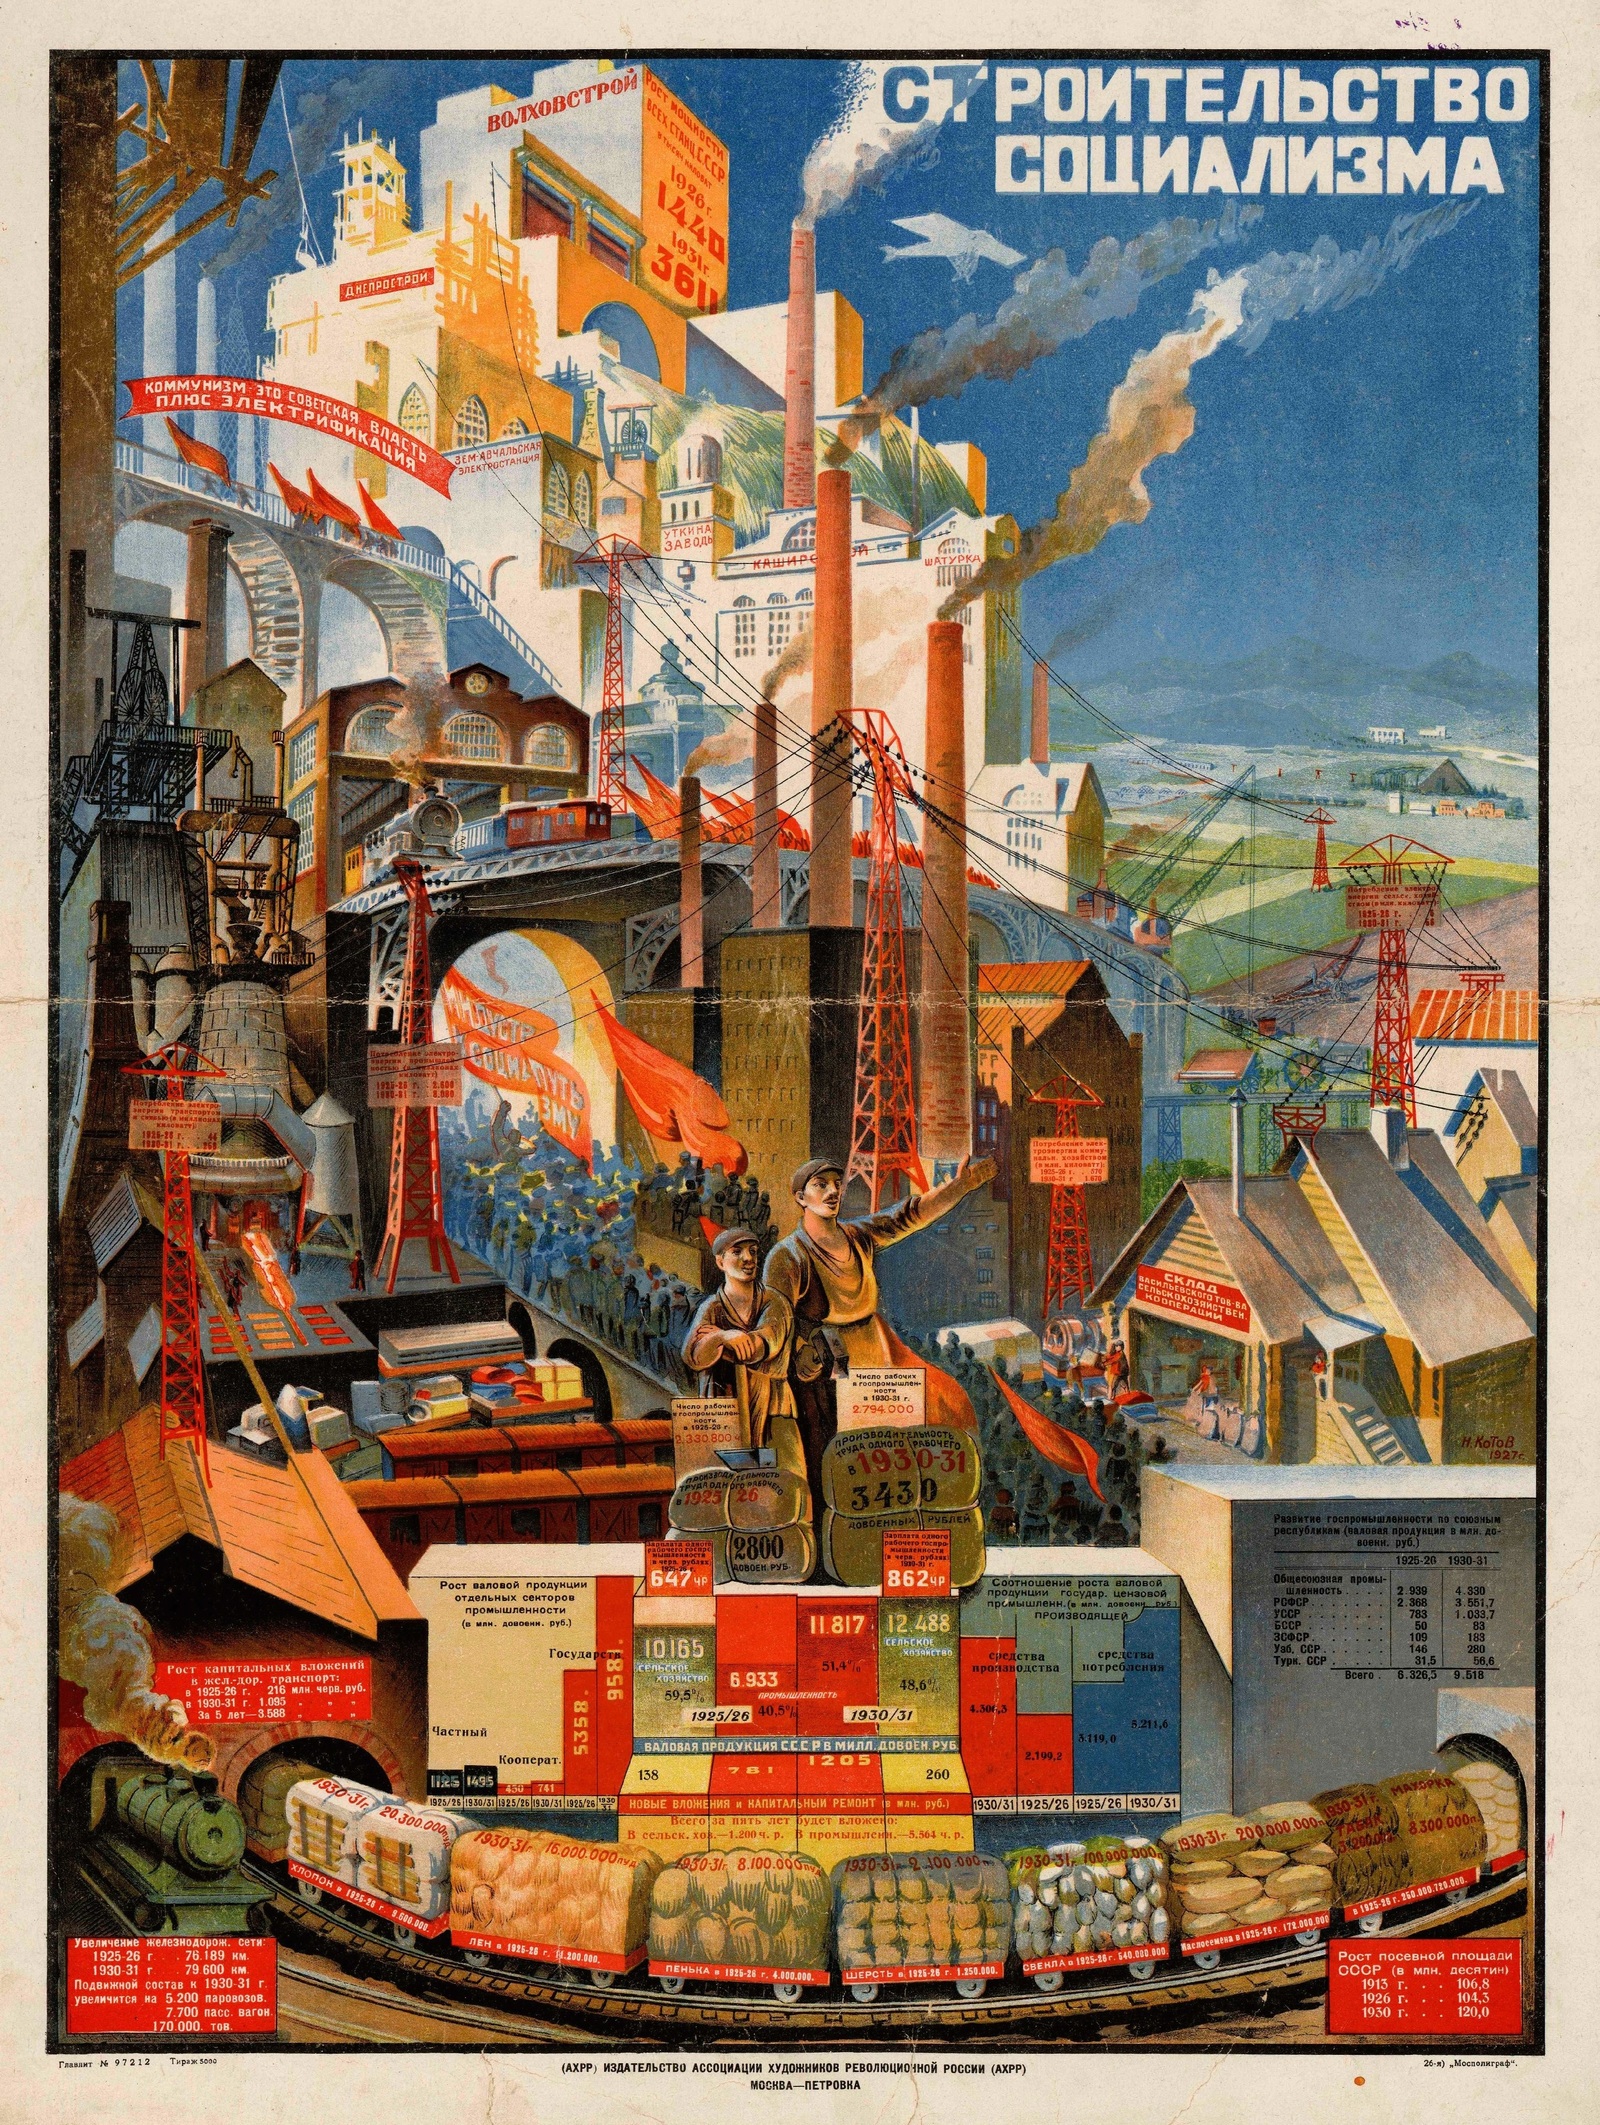 Building Socialism. USSR, 1927 - NEP, Economy, Industry, Socialism, Poster, Soviet posters, the USSR